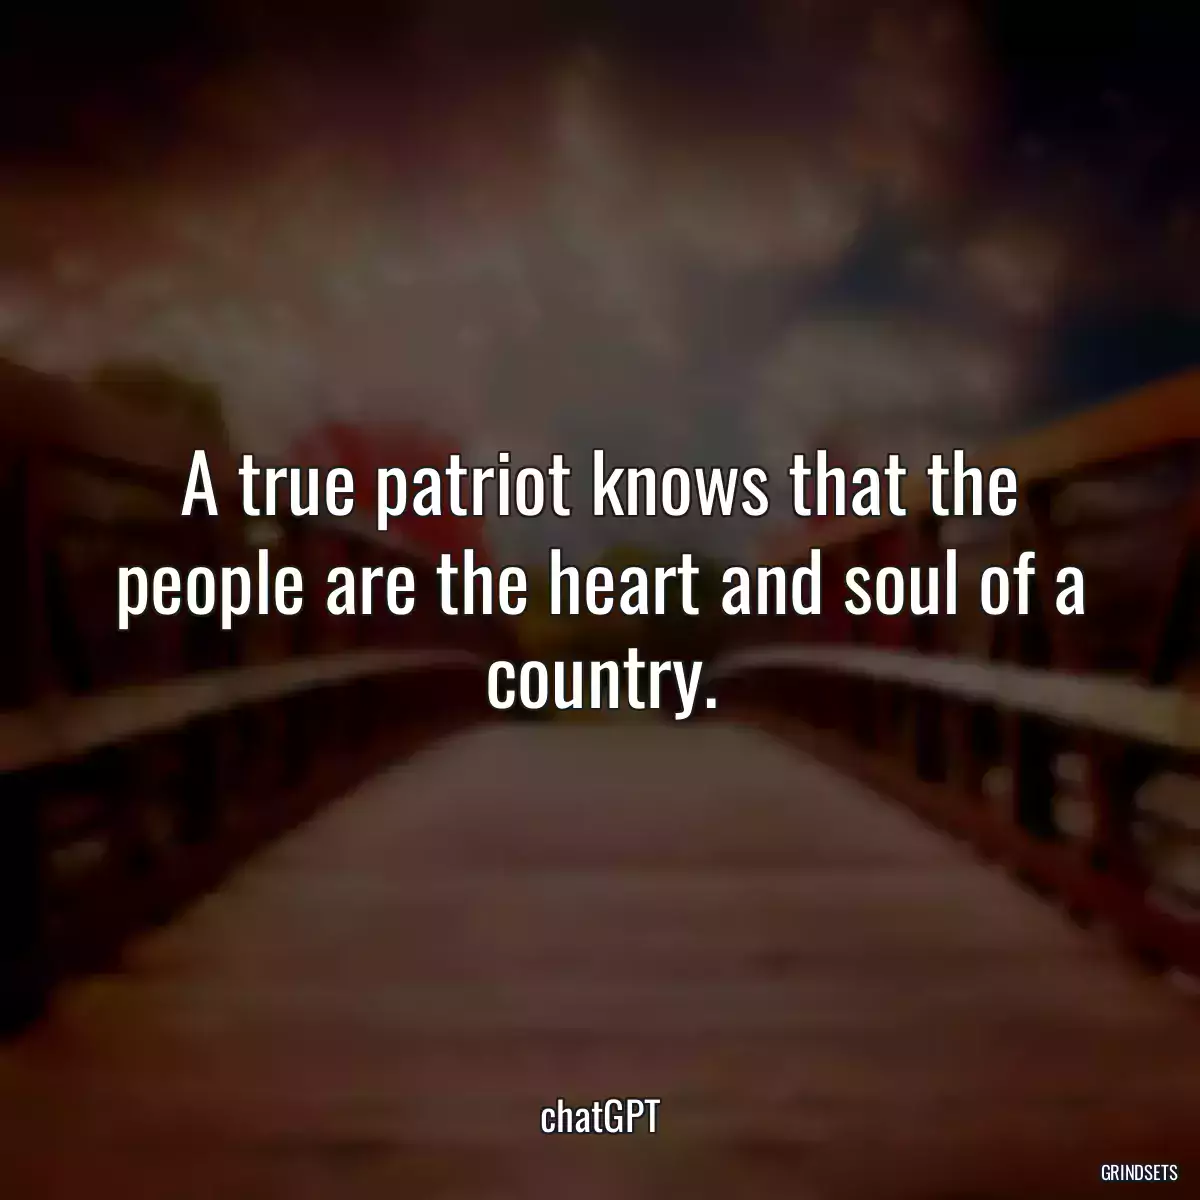 A true patriot knows that the people are the heart and soul of a country.